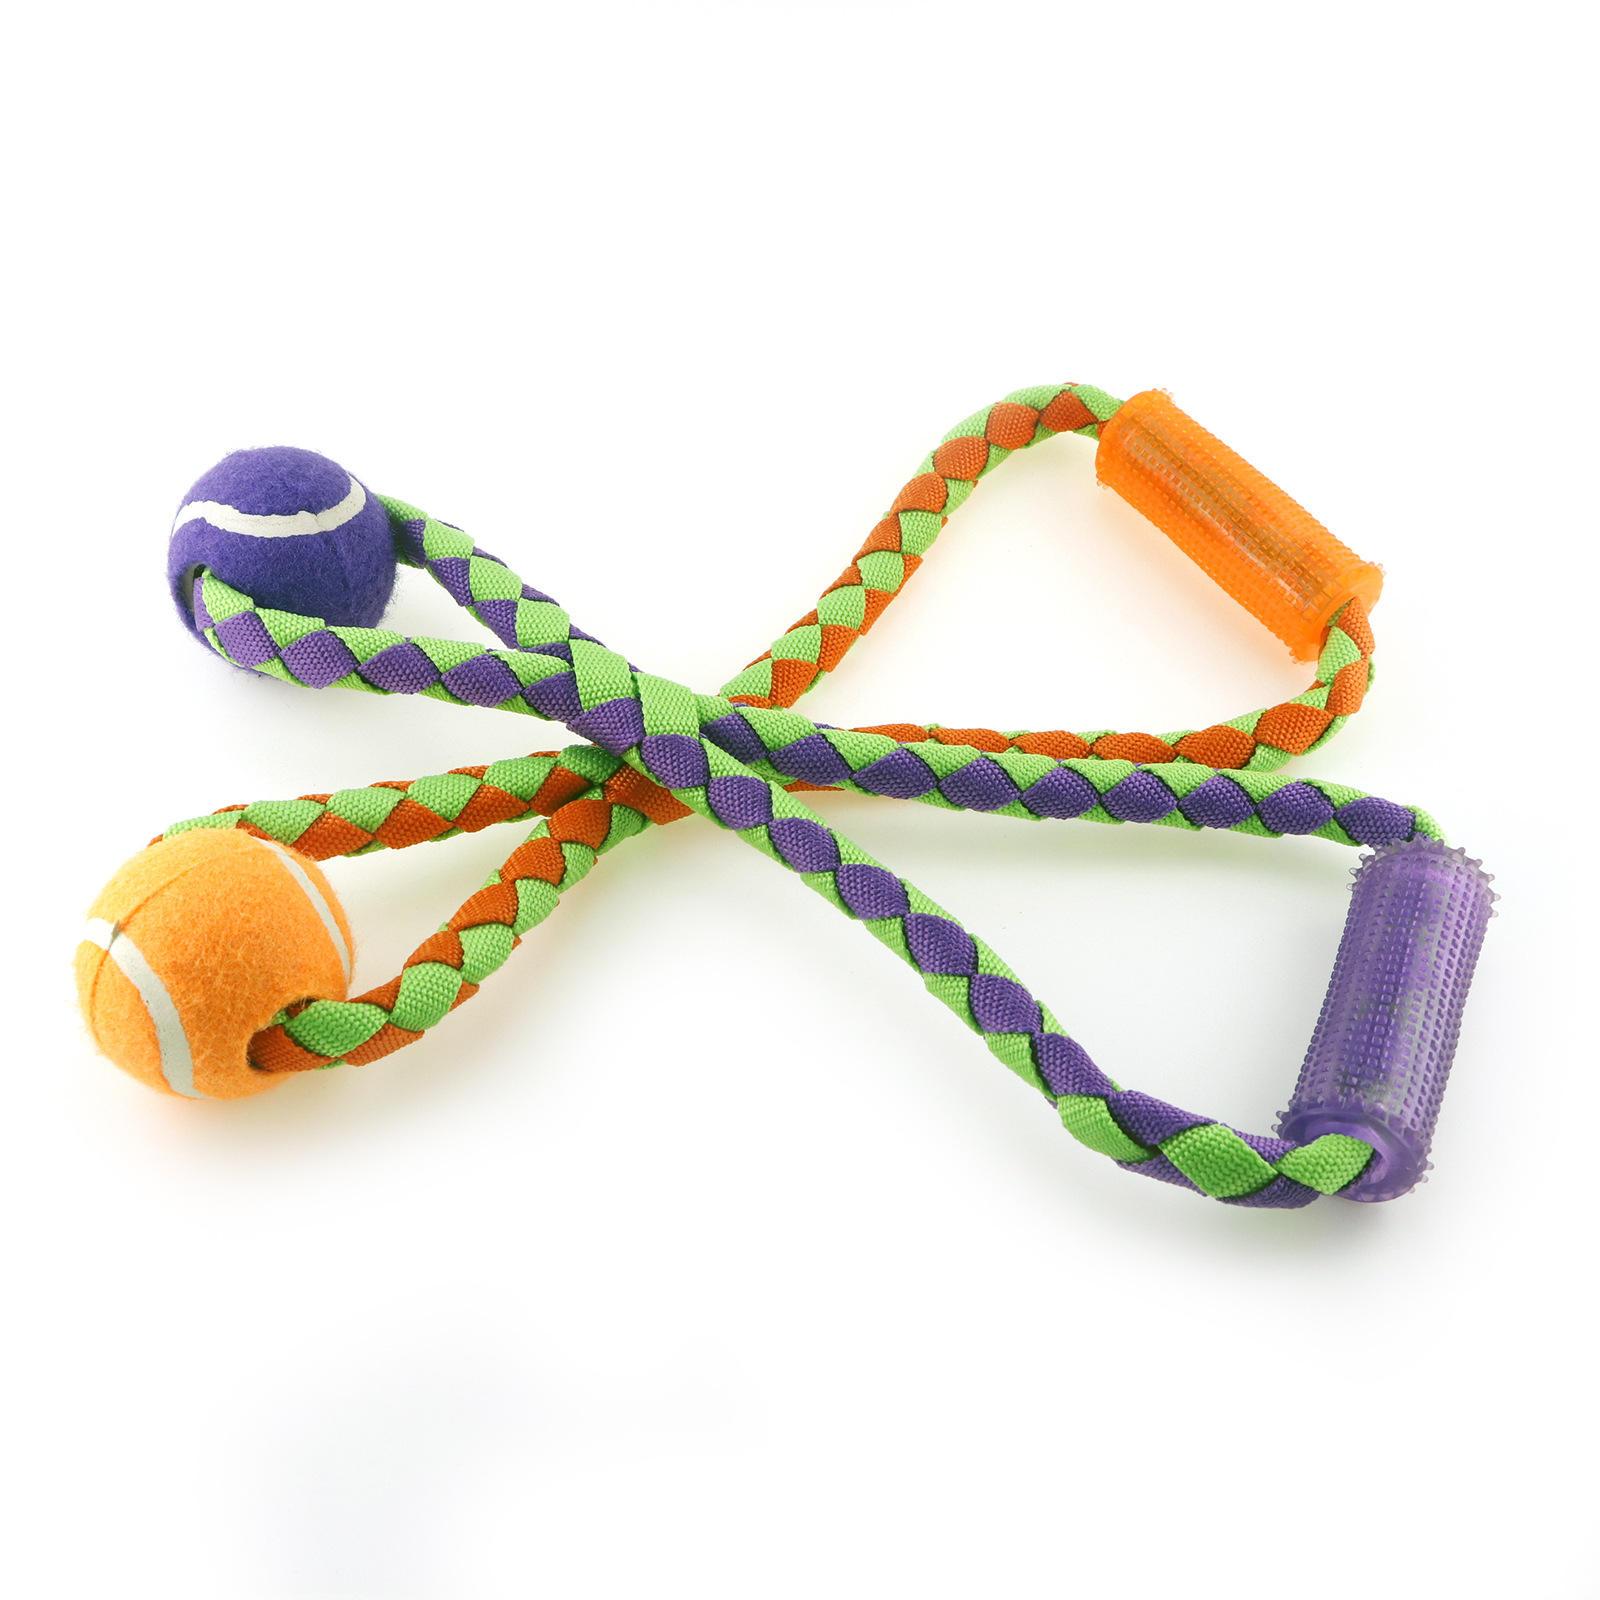 Durable Dog Training Ball On Rope Interactive Training Tug Of War Chewing Fetching